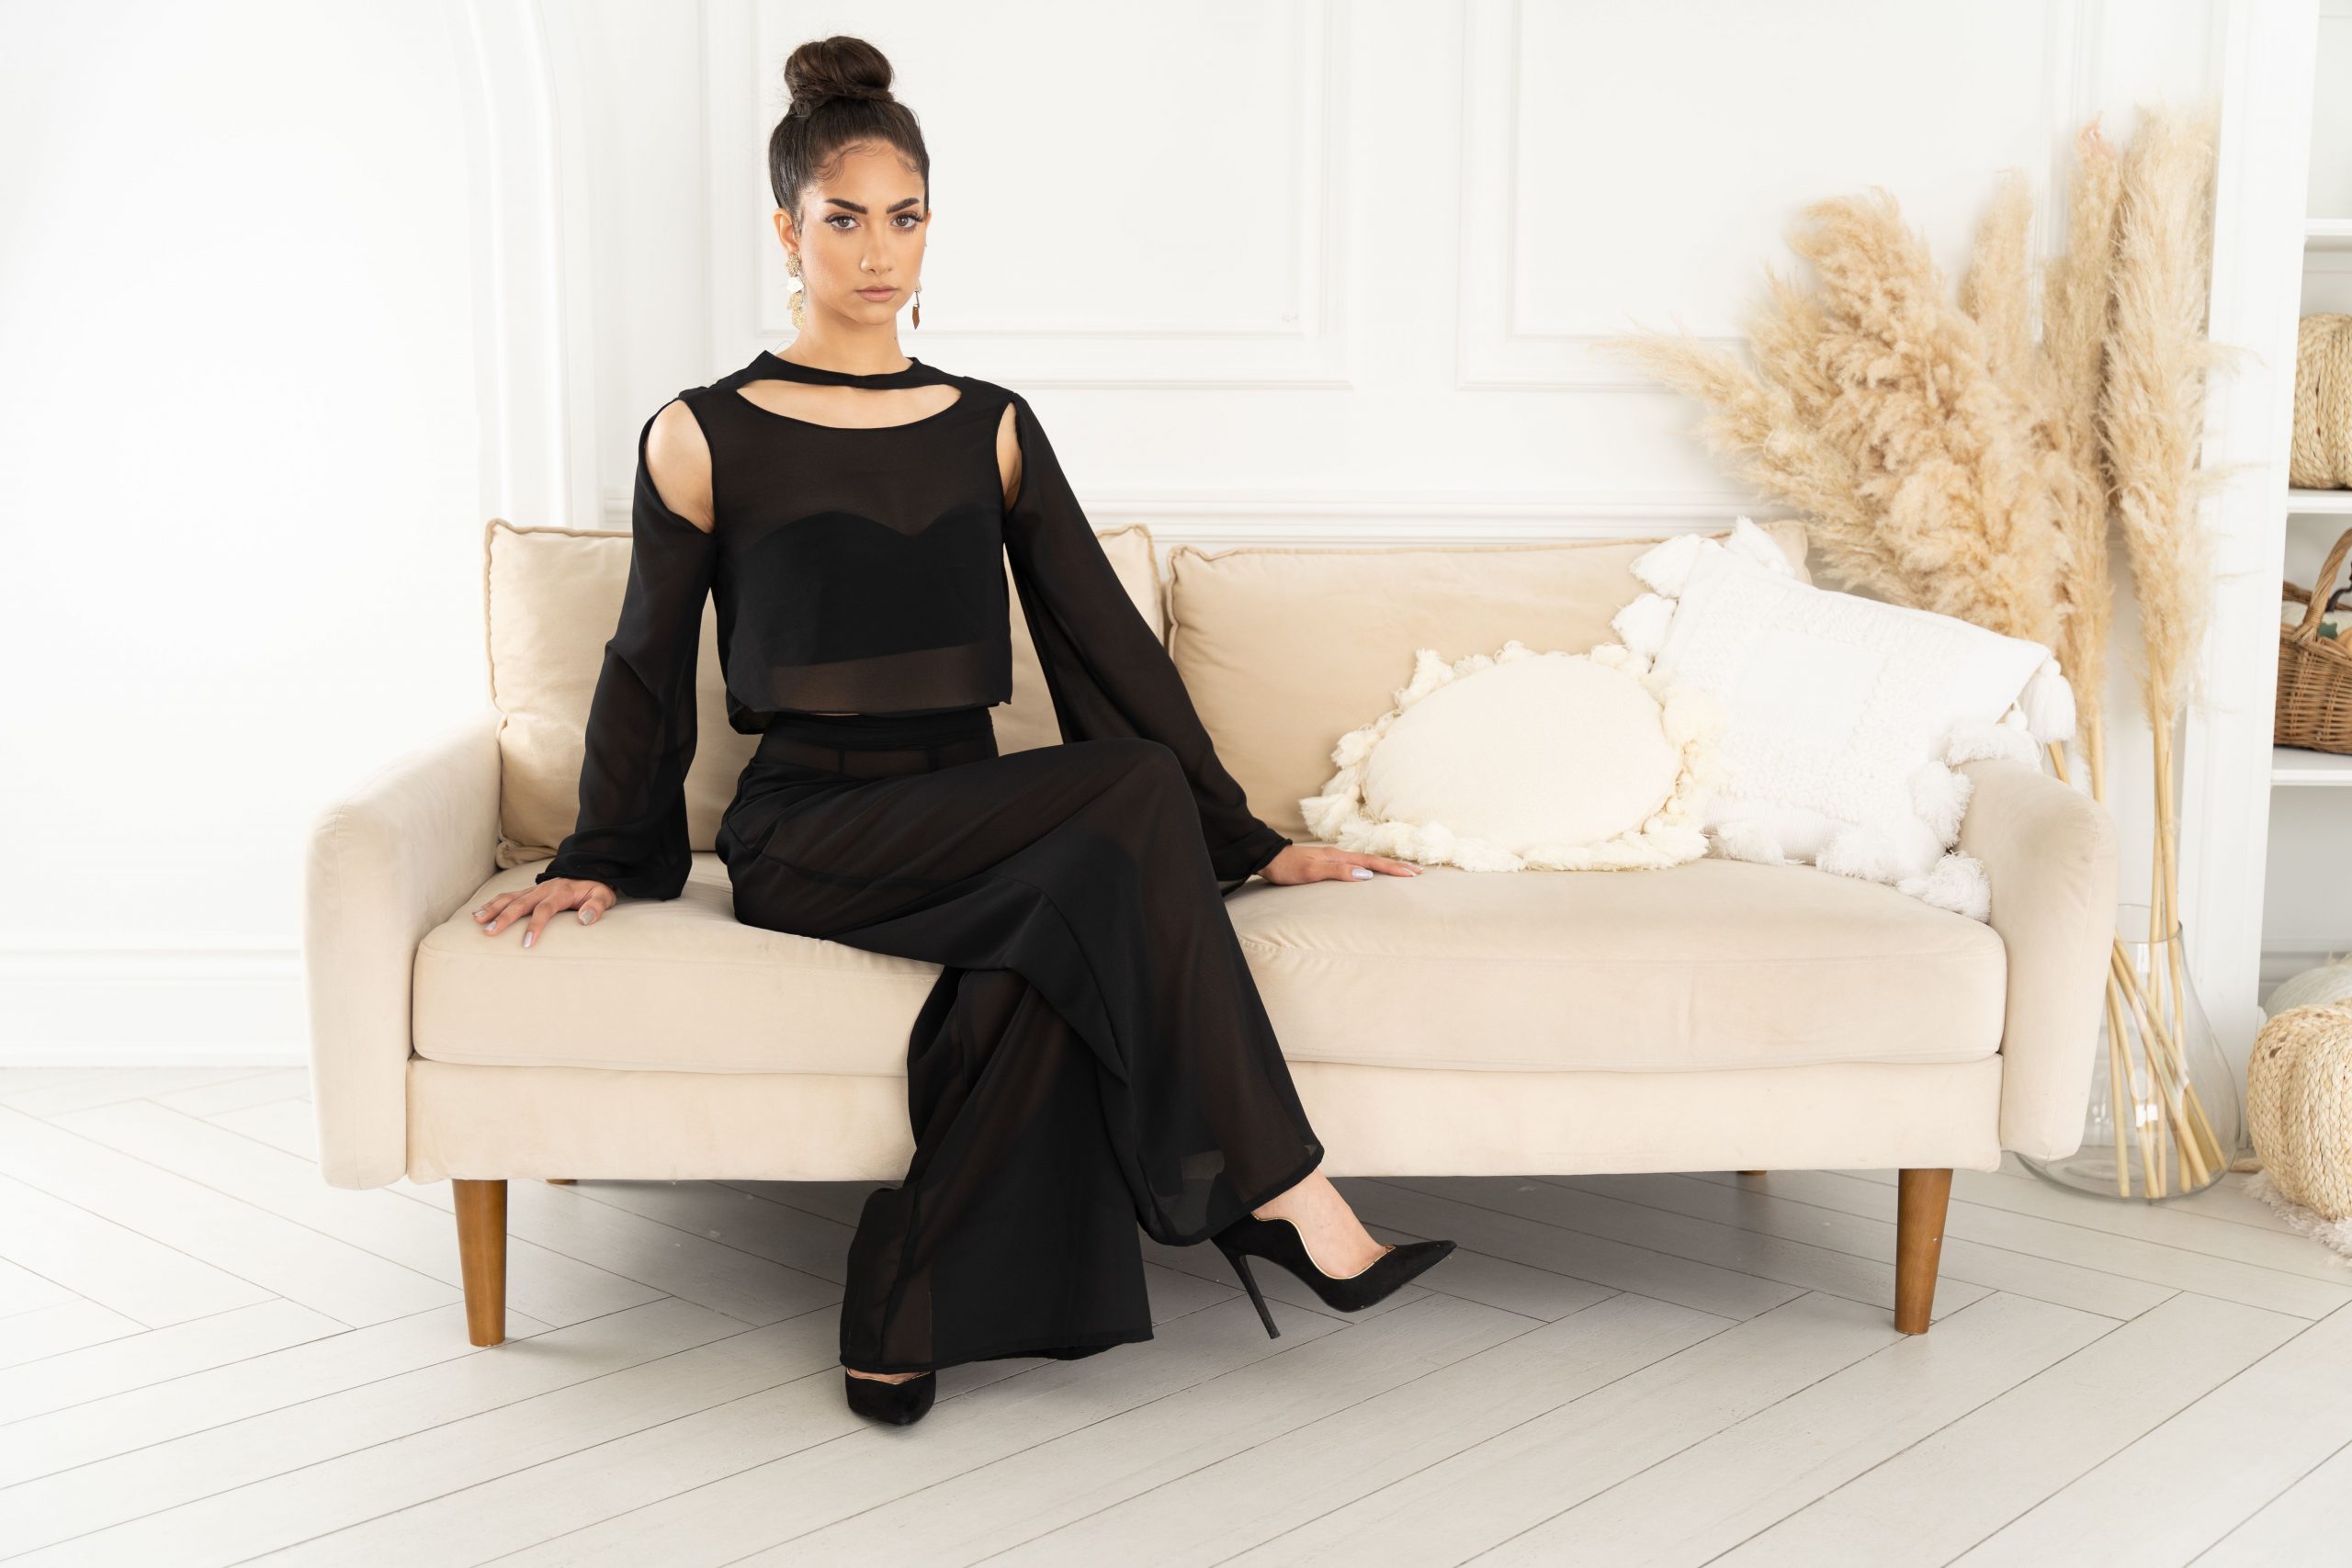 A woman in black dress sitting on couch.